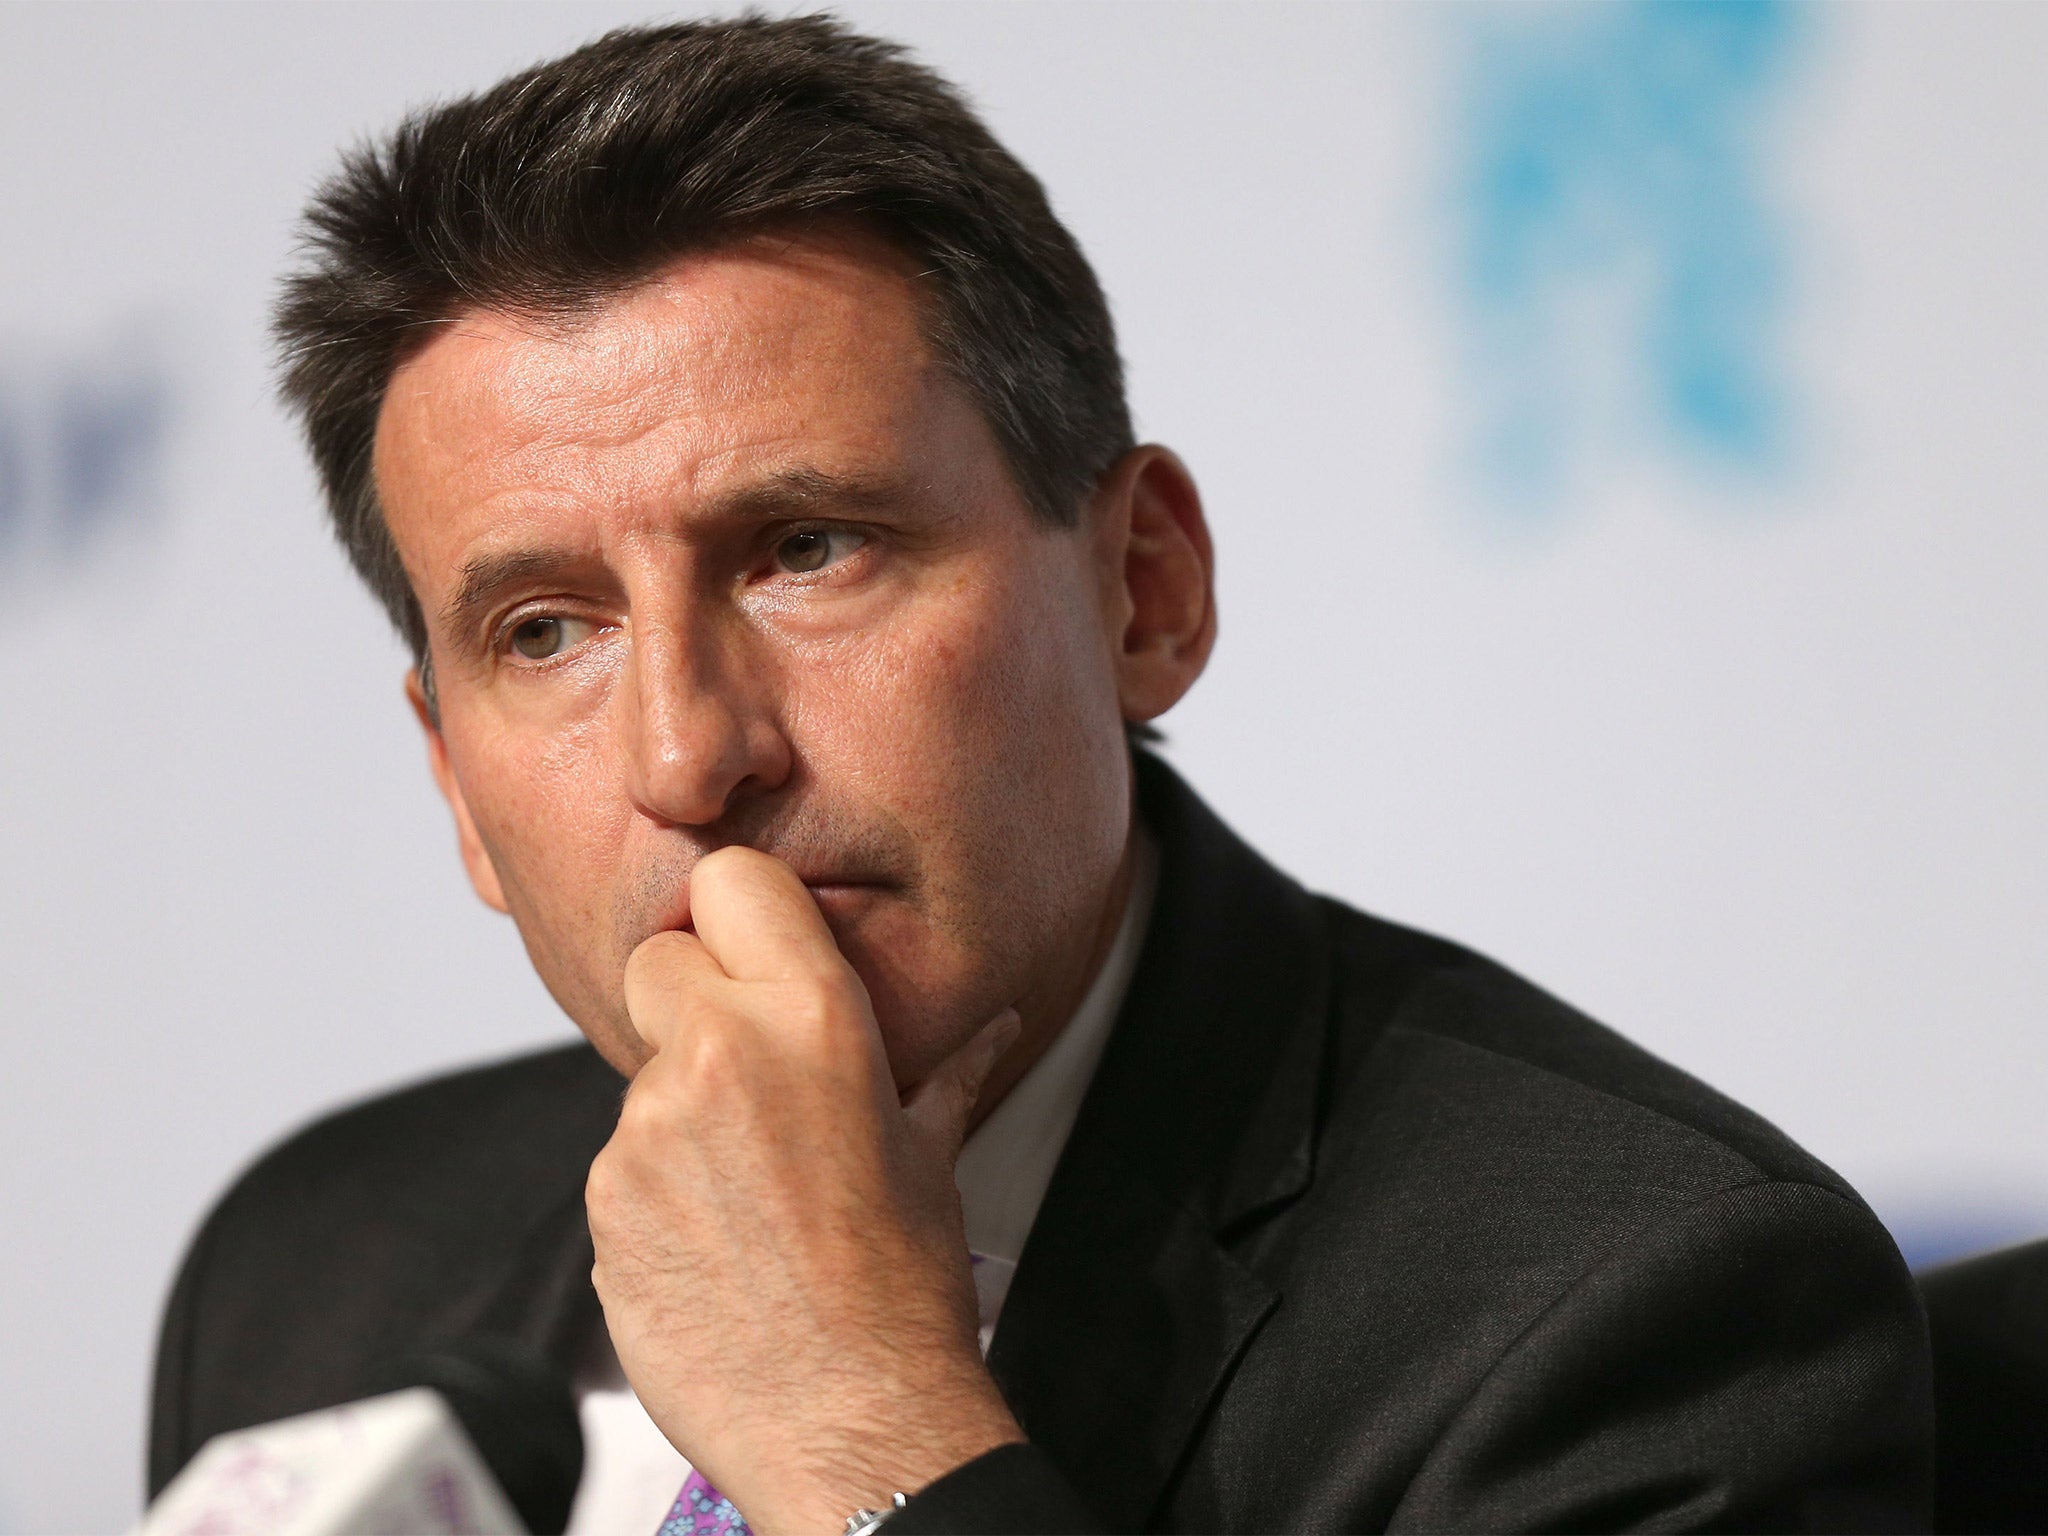 Sebastian Coe has pulled out of the race to become the next chairman of the BBC Trust